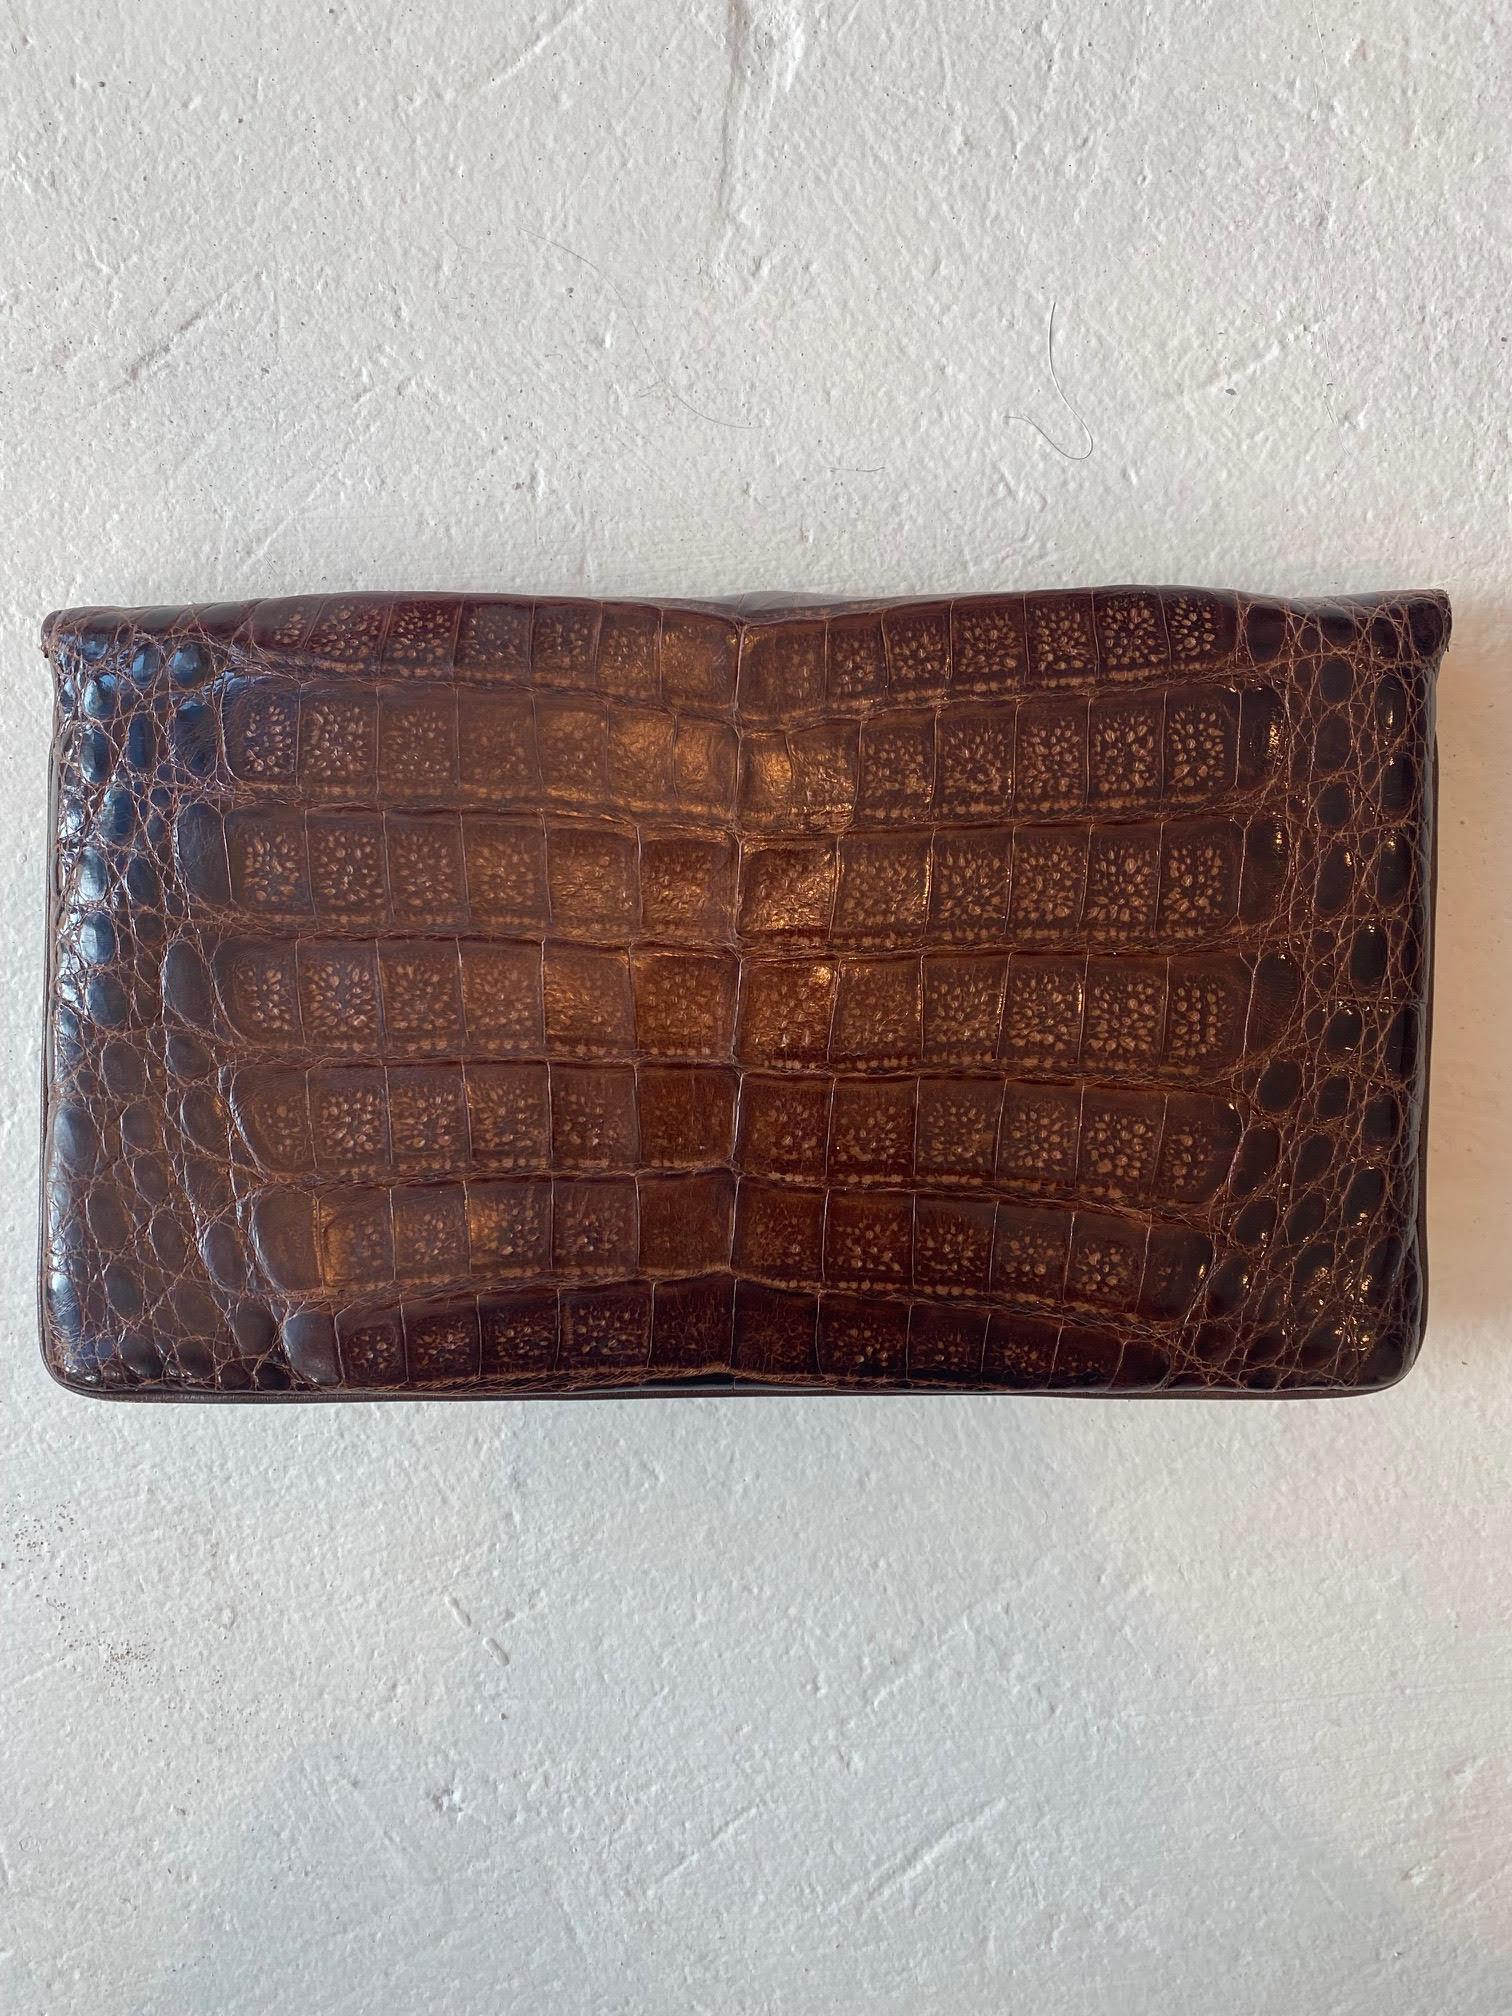 Chanel 1990's NEW brown crocodile envelope clutch For Sale 4